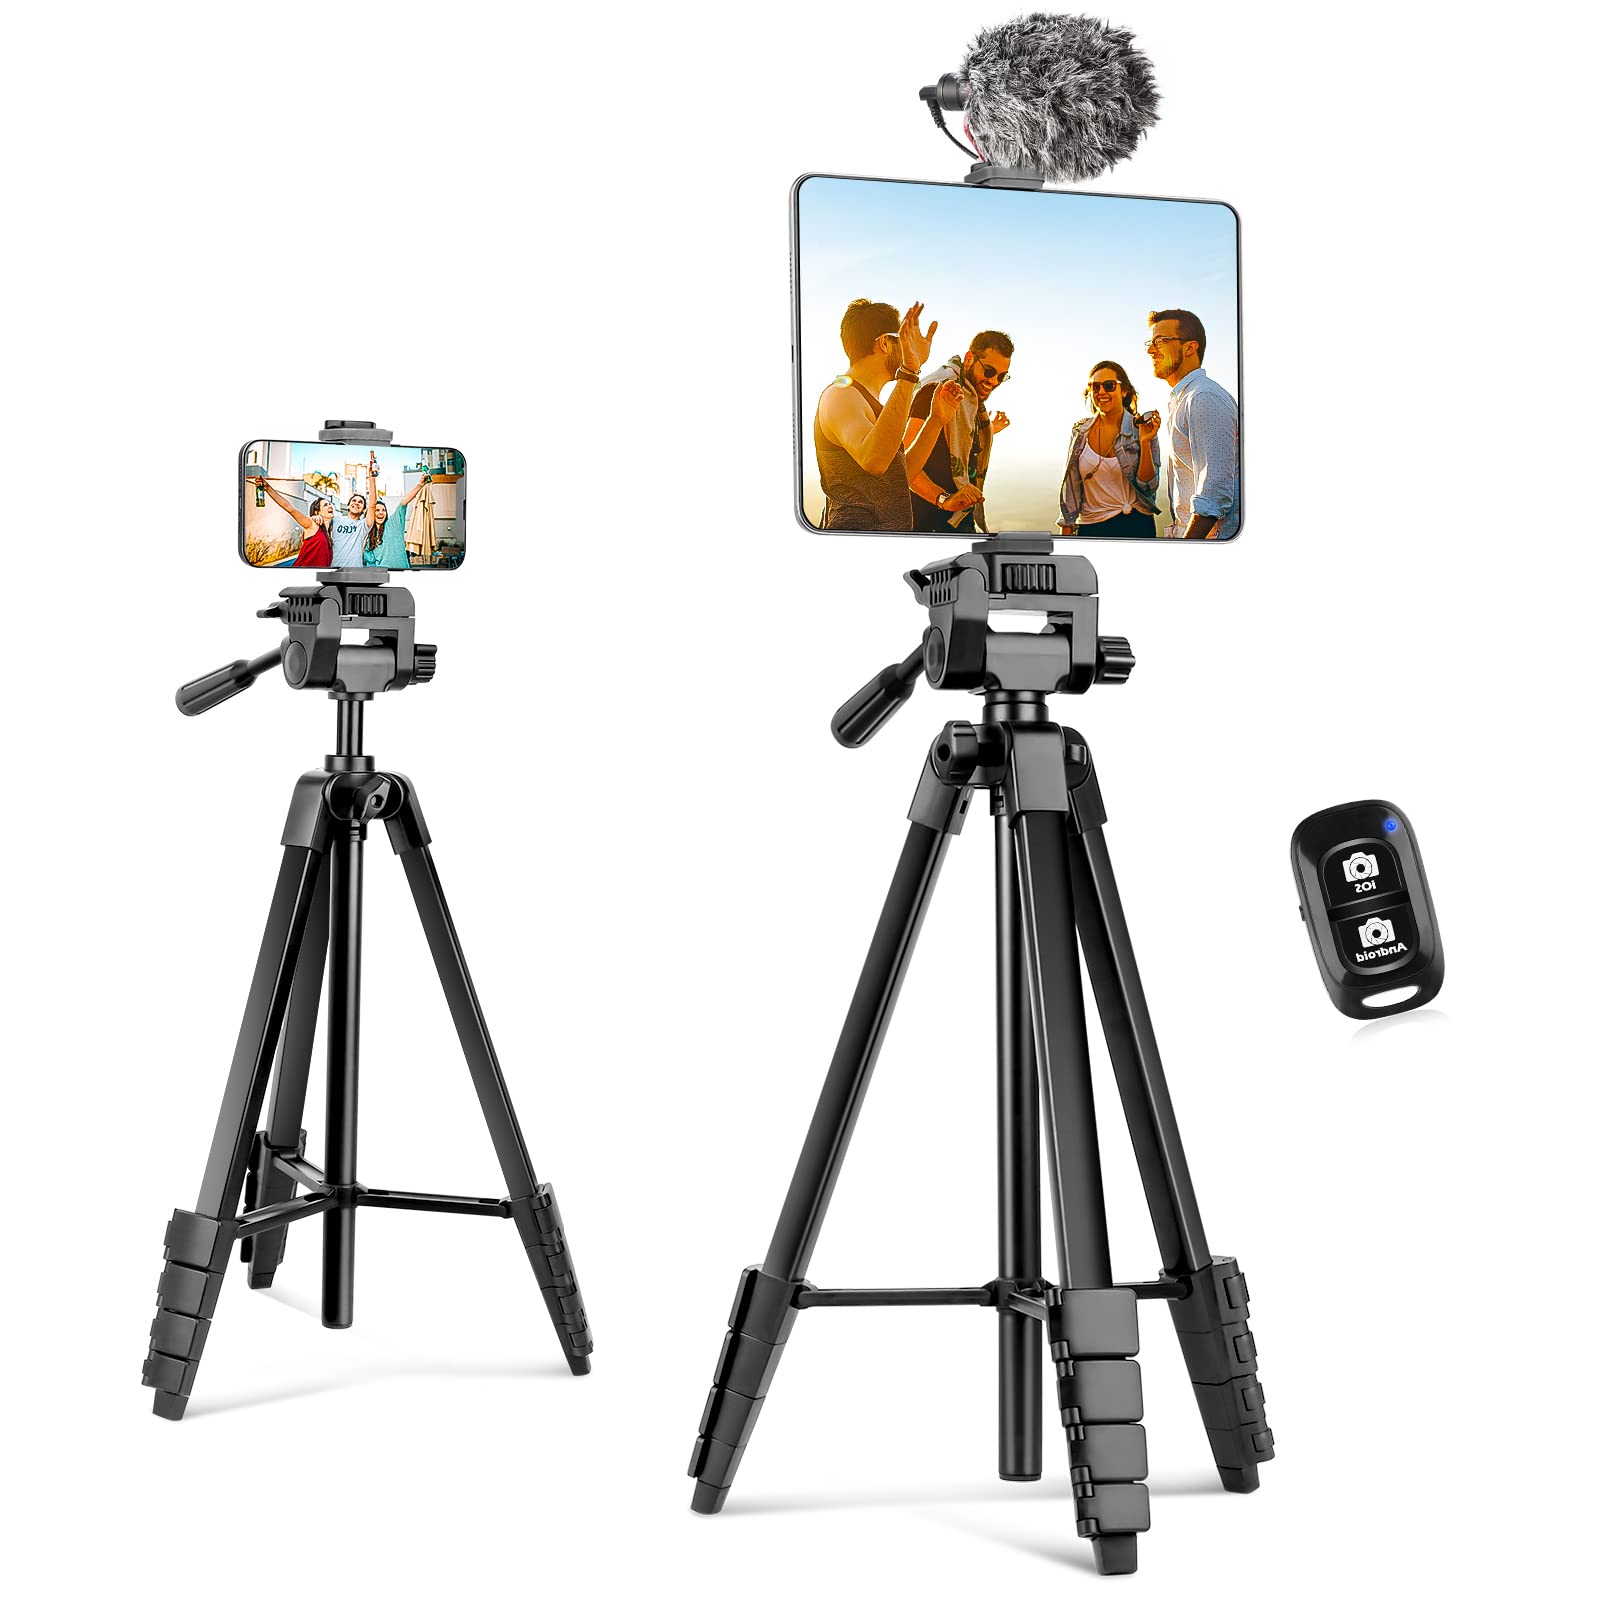 Aureday Phone Tripod Stand, 64” Extendable Cell Phone&Camera Tripod with Wireless Remote and Phone Holder, Aluminum iPad Tripod for Video Recording/Selfies/Live Stream/Vlogging